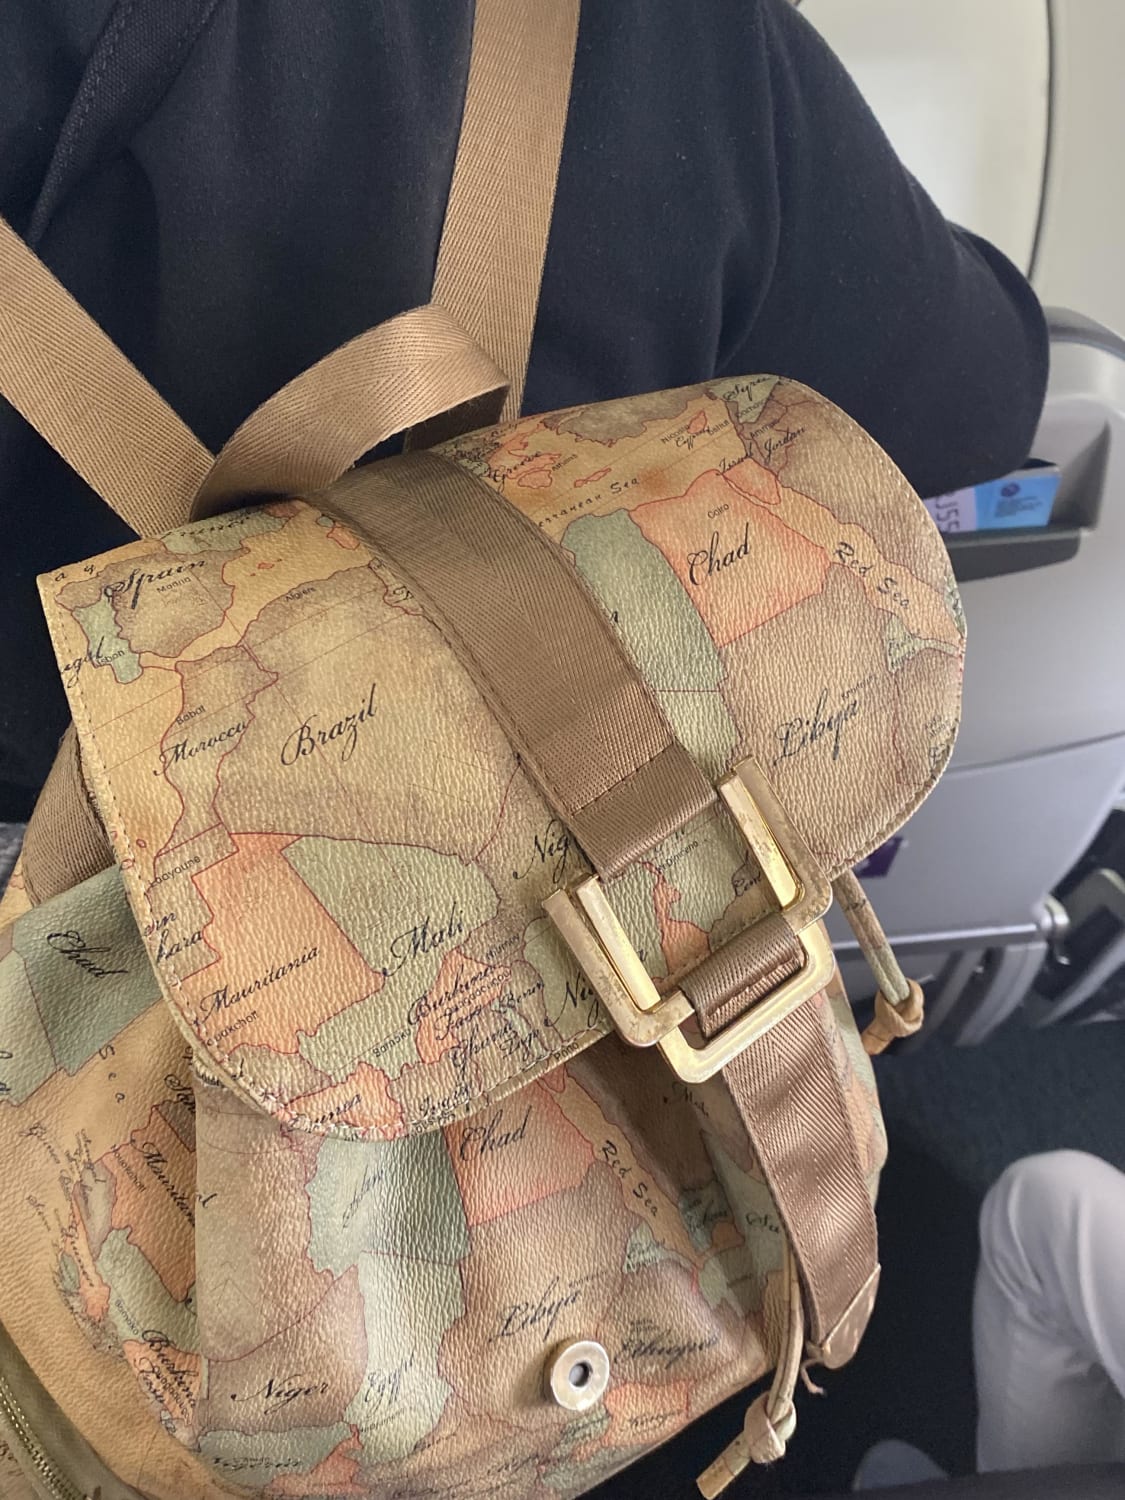 This hilarious map on a backpack